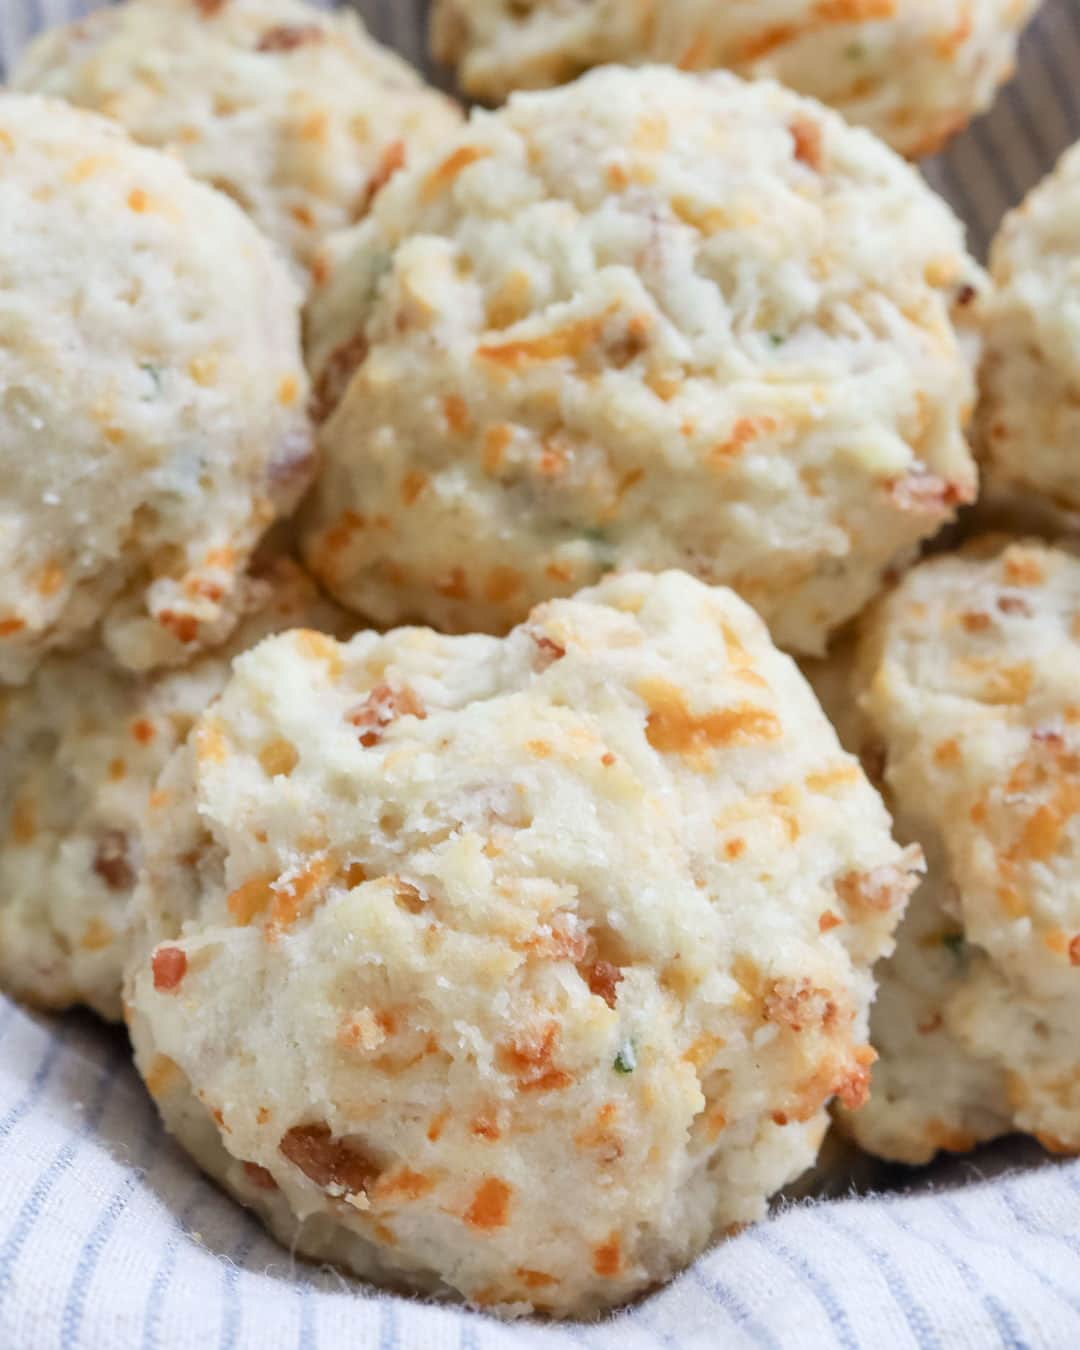 Food Republicさんのインスタグラム写真 - (Food RepublicInstagram)「Bacon-Cheddar Drop Biscuit Recipe   Homemade biscuits are even more approachable if you make the drop kind, which require no rolling or cutting and are delicious with any mix-ins.  Recipe developed in collaboration with Jessica Morone.  Prep Time: 10 minutes  Cook Time: 30 minutes  Servings: 15 biscuits  Ingredients: - 6 slices bacon - 2 cups all-purpose flour - 1 tablespoon baking powder - ½ teaspoon salt - ½ cup (1 stick) cold unsalted butter, cut into cubes - 1 teaspoon garlic powder - 1 cup shredded cheddar - 1 tablespoons chives - 1 ¼ cup buttermilk  Directions: 1. Preheat the oven to 400 F.  2. Cook the bacon in the oven on a foil-lined baking sheet for 15-20 minutes until crispy. Let drain and cool on a paper towel-lined plate before chopping into small pieces and setting aside.  3. Increase the oven temperature to 425 F.  4. In a food processor, mix the flour, baking powder, and salt, then cut in the butter until the mixture resembles coarse sand.  5. Transfer the mixture to a large bowl and stir in the garlic powder, cheddar cheese, chives, and crumbled bacon.  6. Add the buttermilk to the bowl, stirring until just combined and a dough is formed.  7. Use a 2-ounce cookie scoop or ¼ cup measuring cup to drop mounds of biscuit dough onto a parchment-lined   -  #easybreakfast #breakfastinspo #breakfastrecipe #breakfastidea #breakfeastideas #breakfastinbed #breakfasttime #breakfastrecipes #healthybreakfast #breakfastrun #breakfastfood #breakfastofchampions #breakfastforchampions #breakfasting #breakfastisserved #breakfastonthego #breakfastforlunch #breakfastathome #breakfasttoday #breakfastallday #breakfastparty  #breakfastfortwo #breakfastdate #breakfastporn」9月5日 22時53分 - foodrepublic